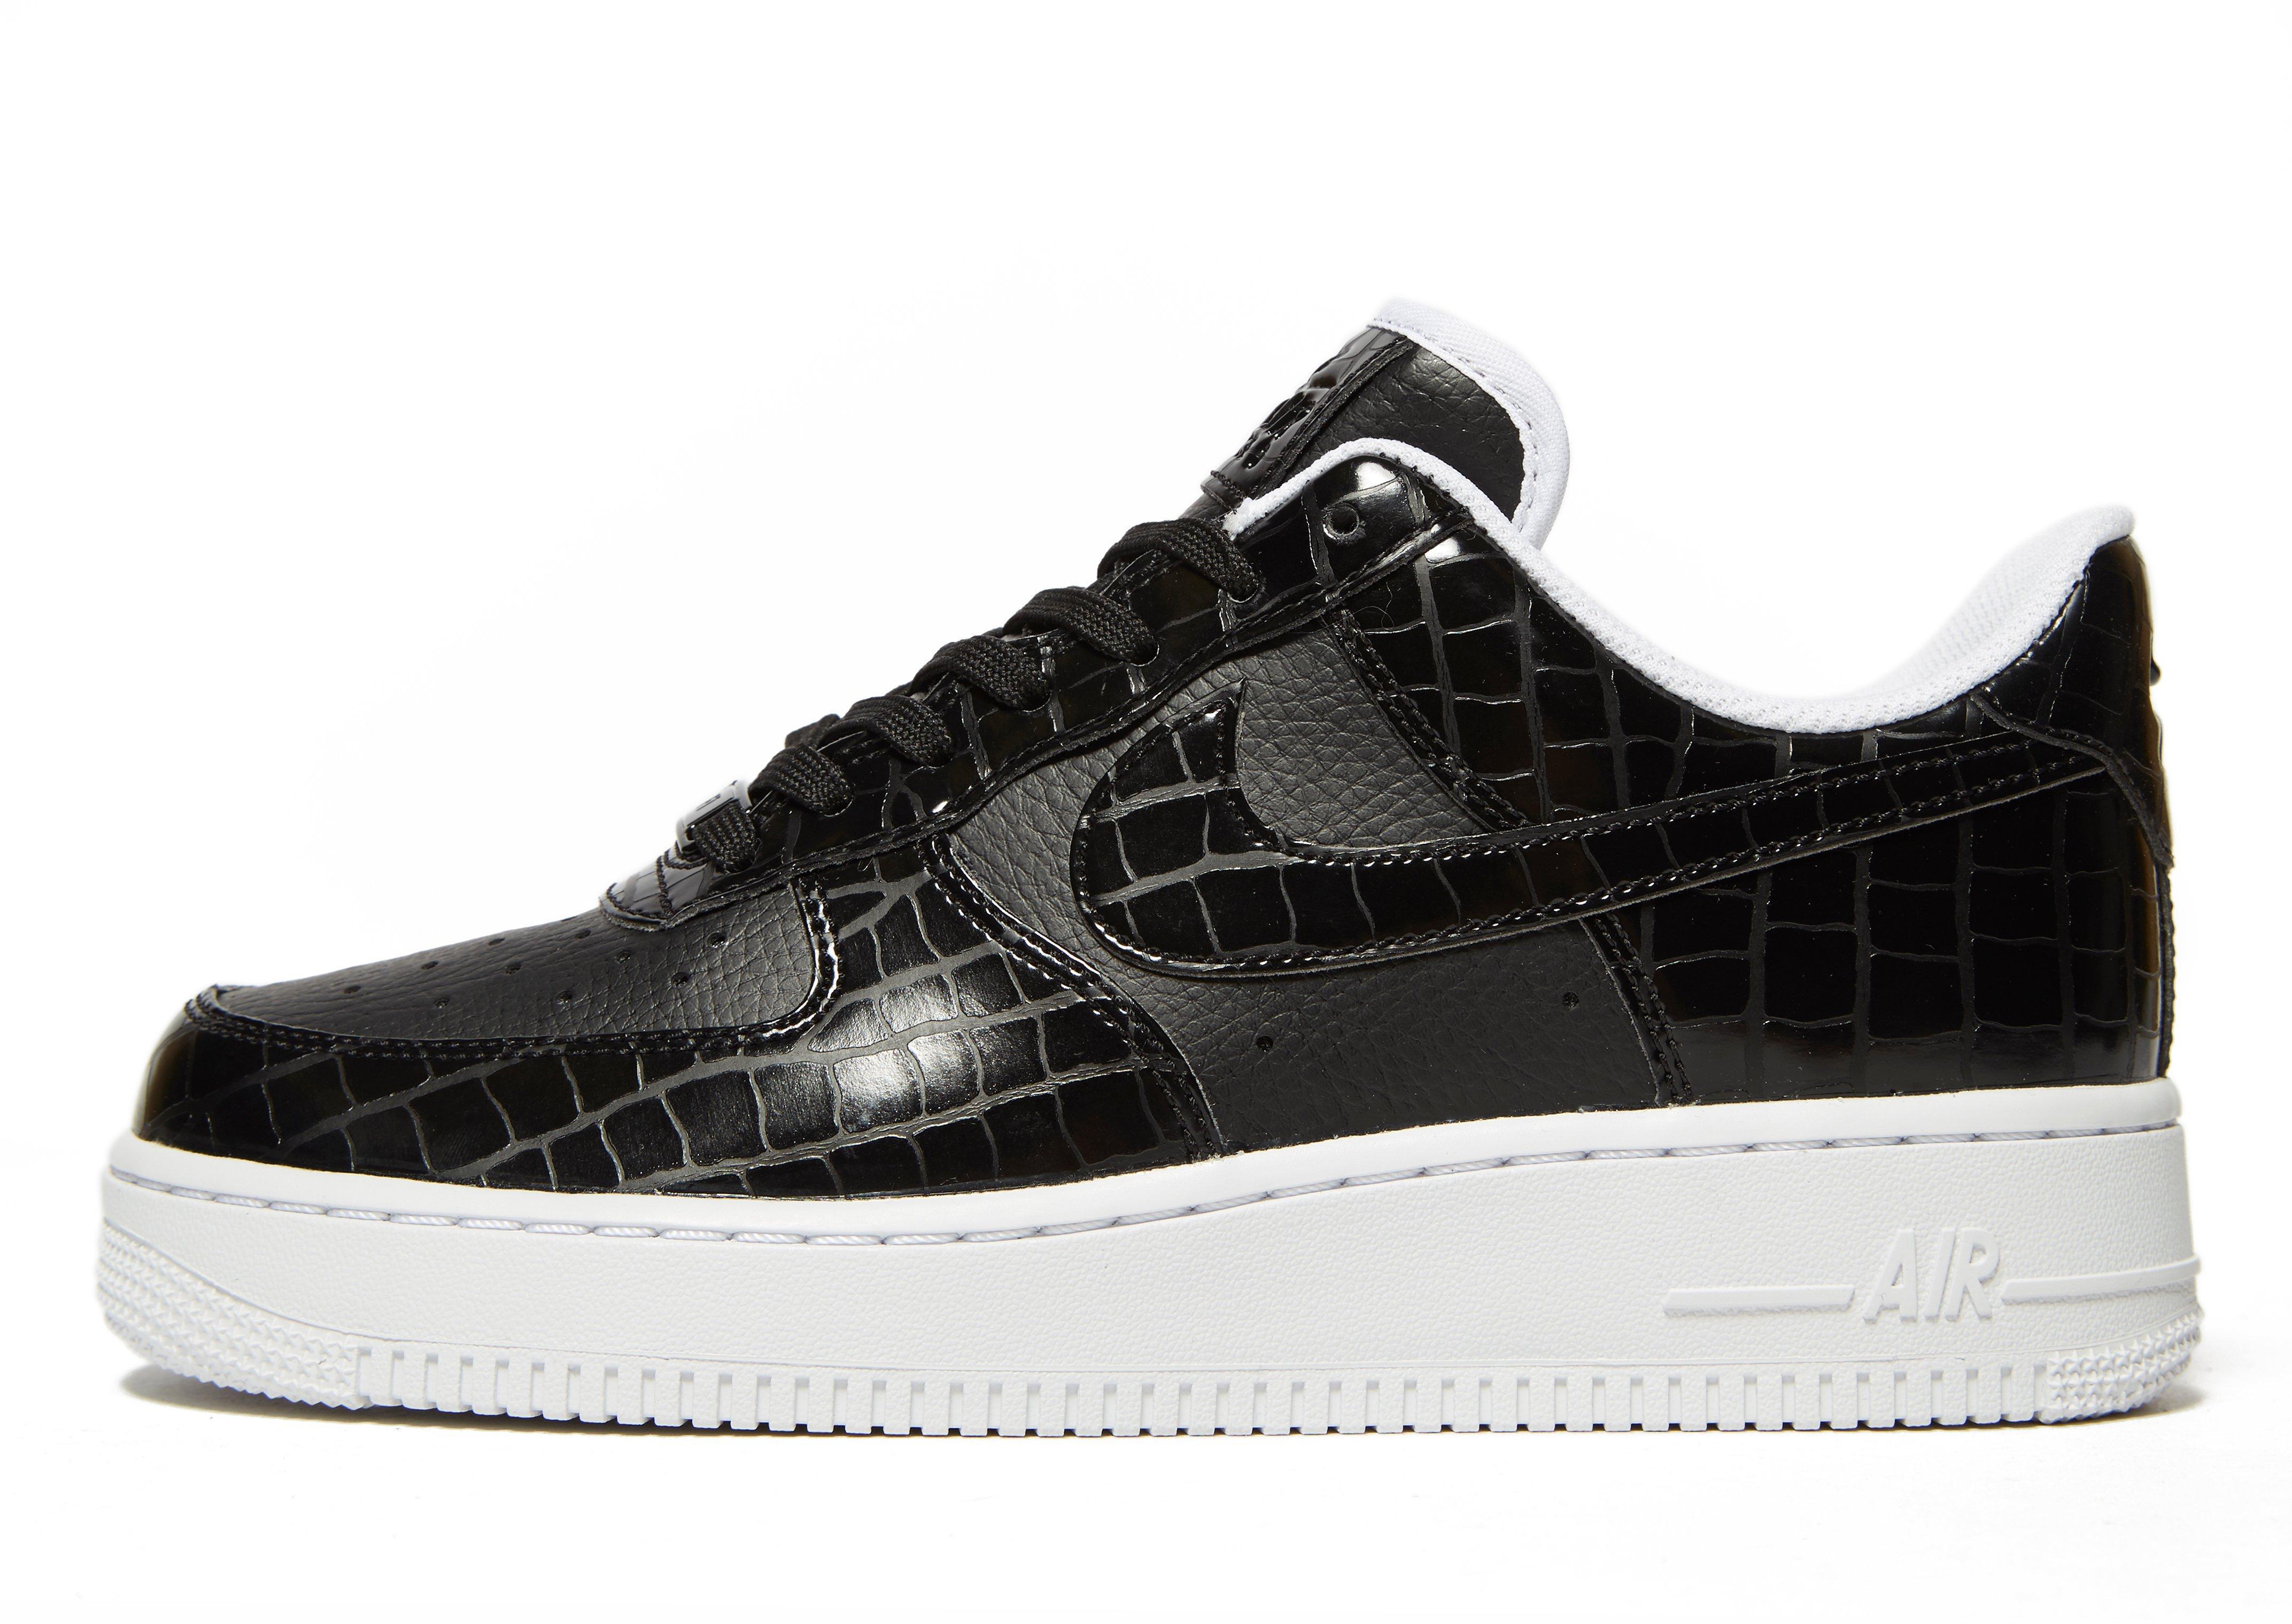 Nike Leather Air Force 1 Reptile in 